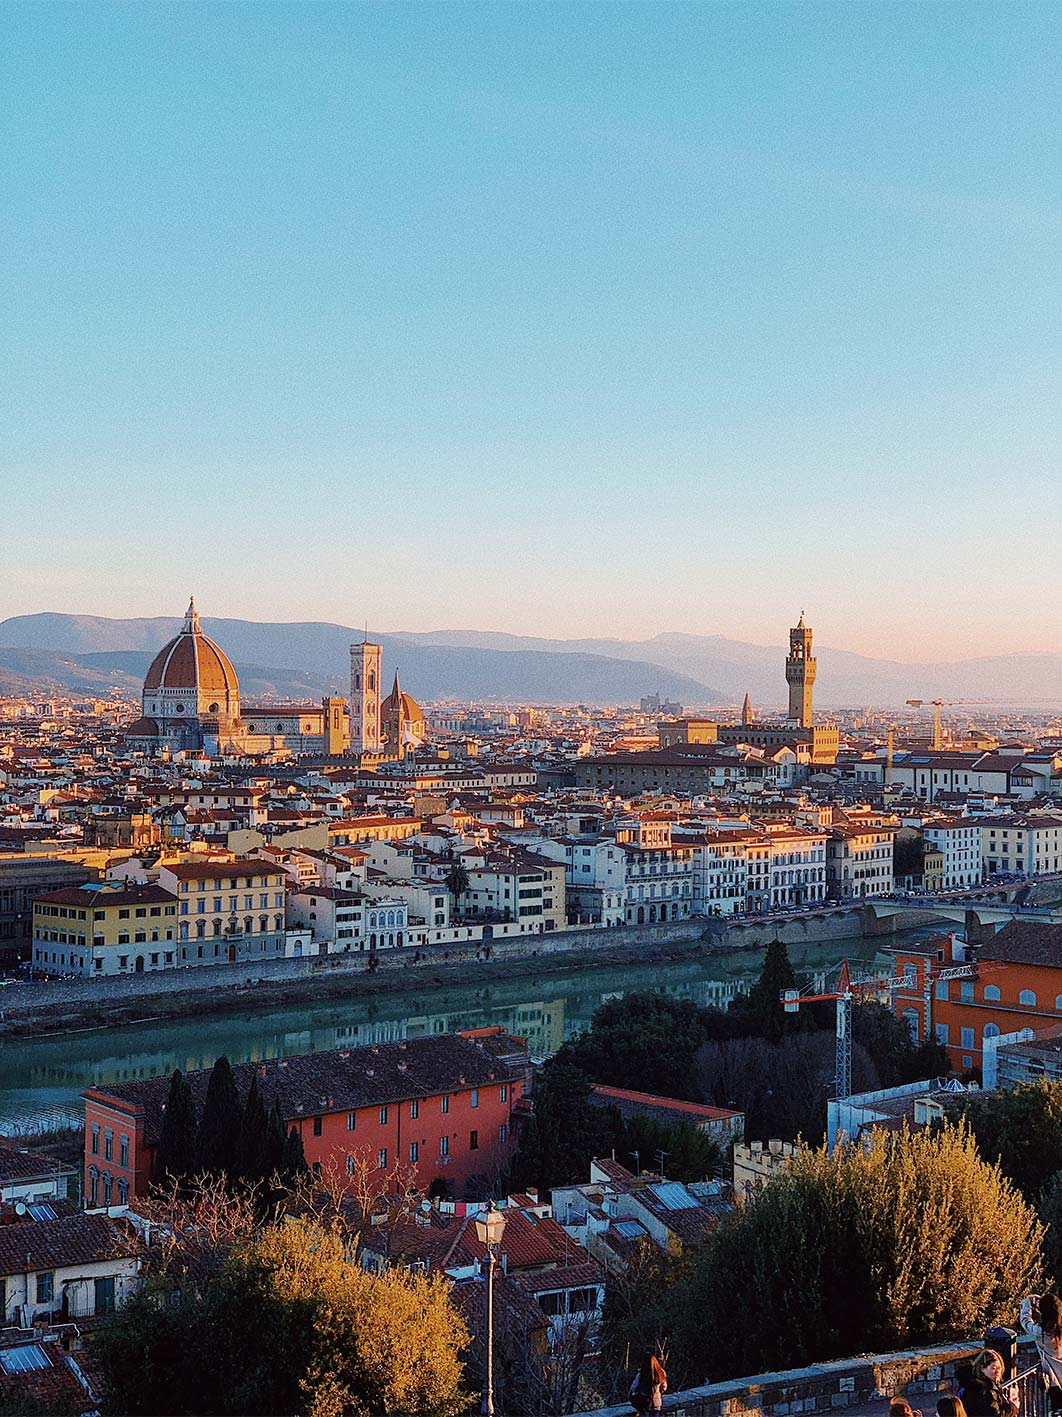 A museum town of Florence